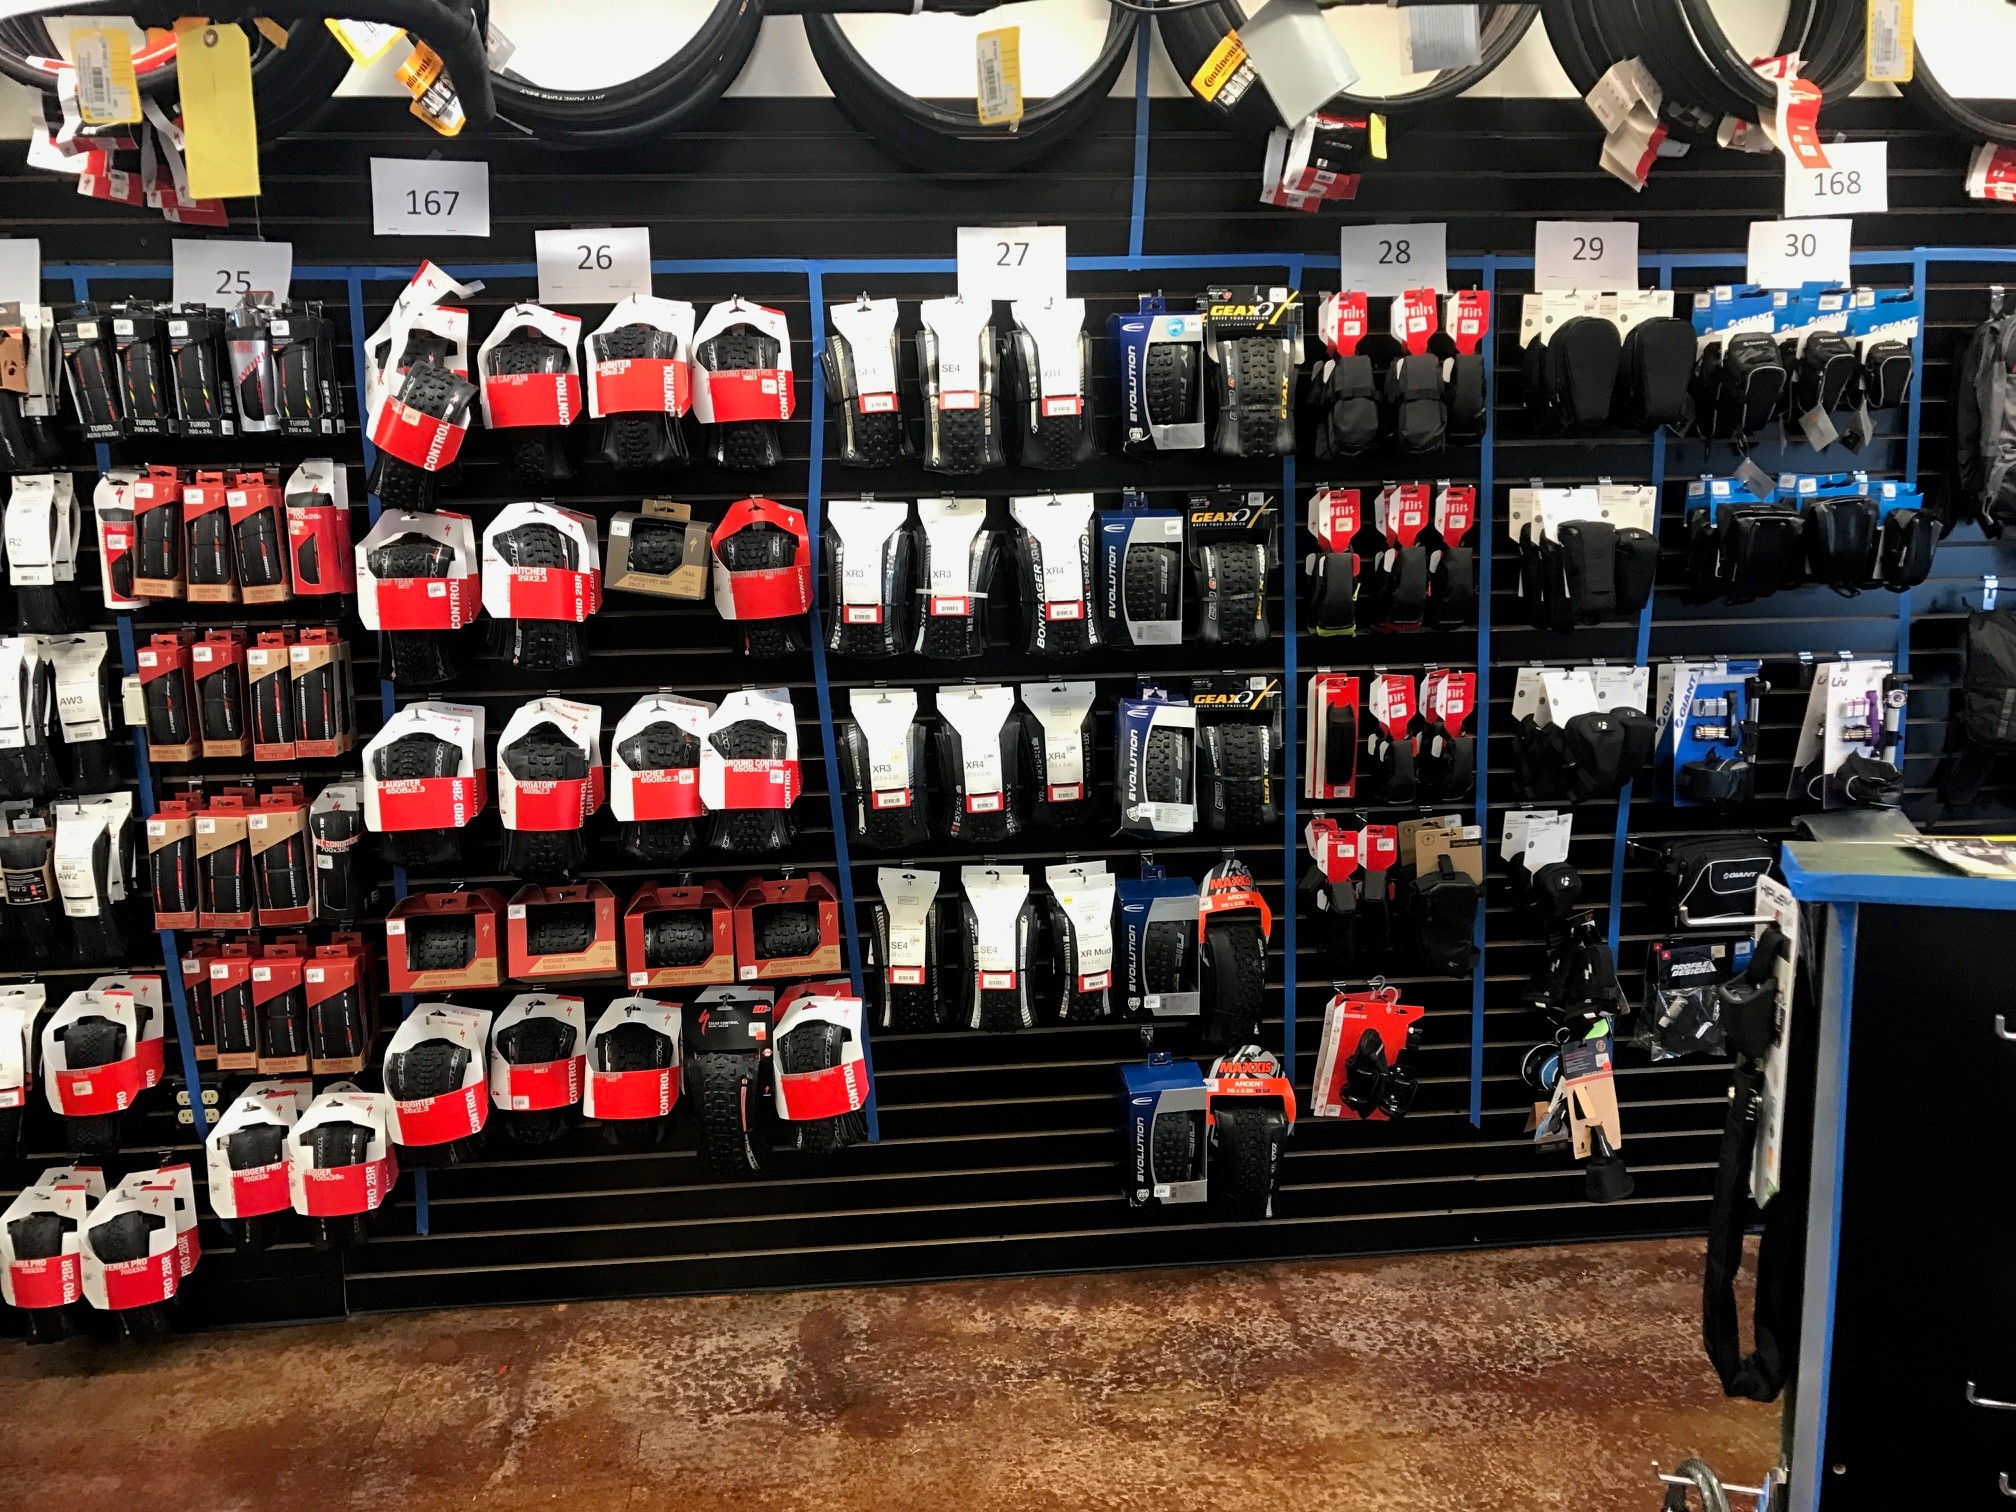 Photo of a store display wall with numbers 25 - 30 above each section of product